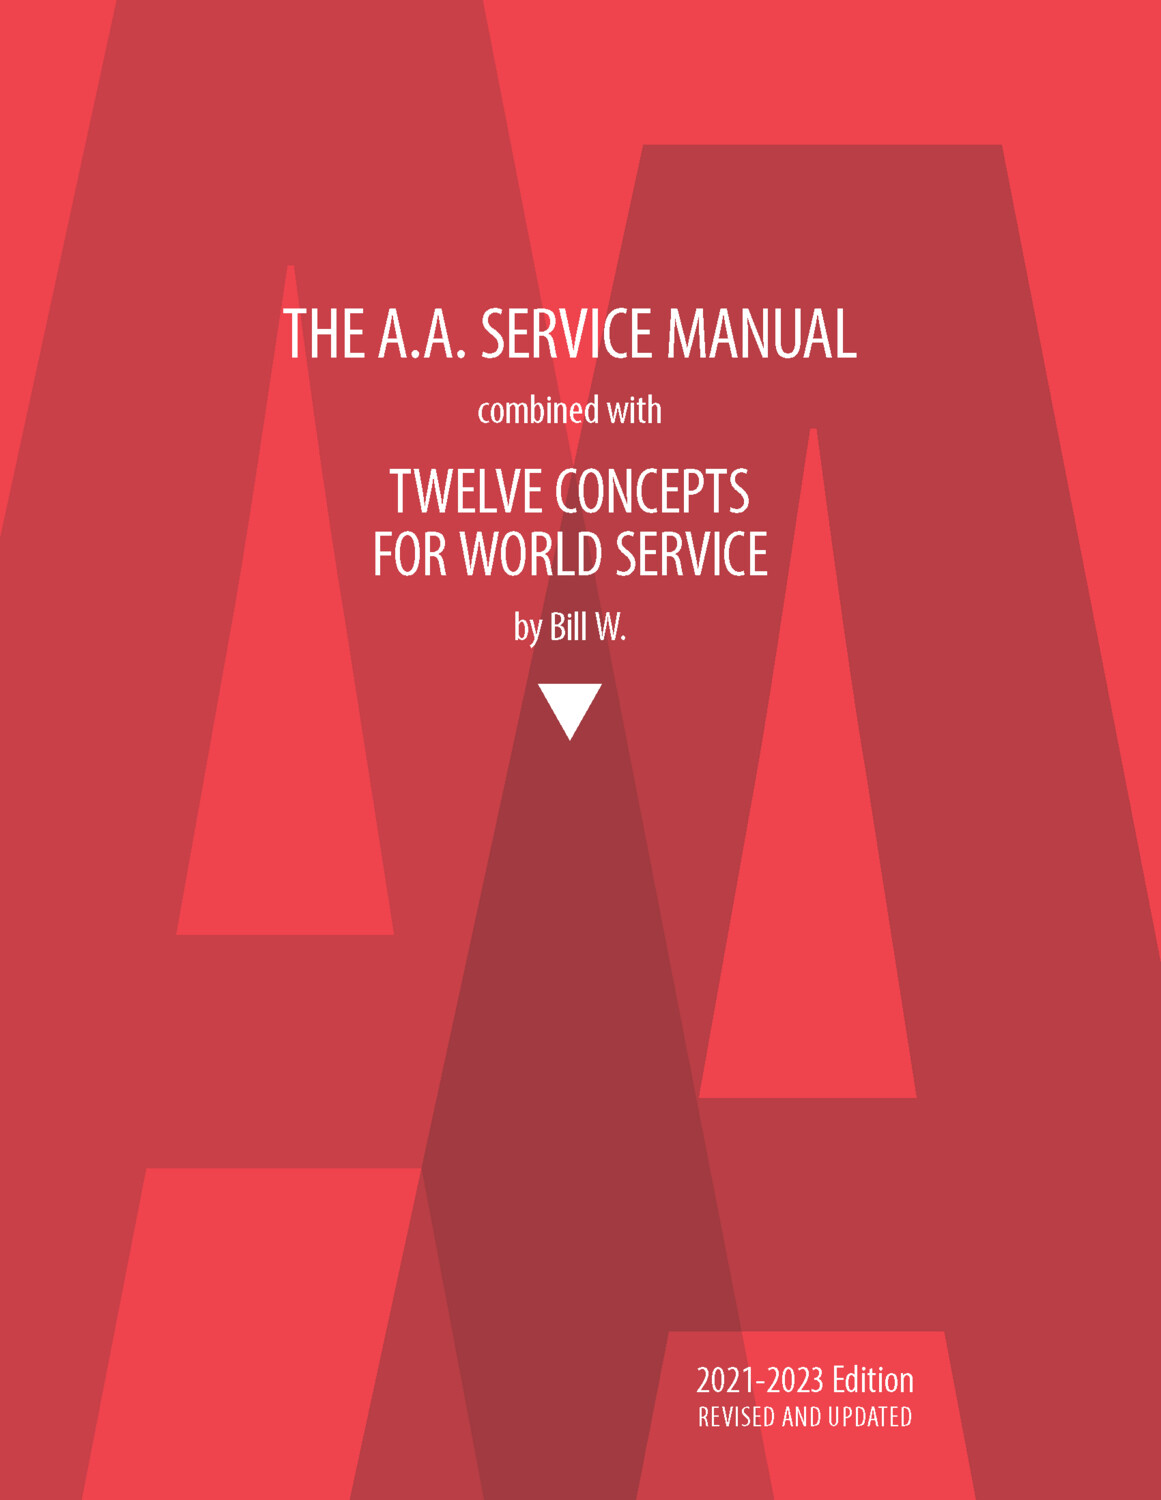 A.A. Service Manual/Twelve Concepts for World Service (large print) 2021-2023